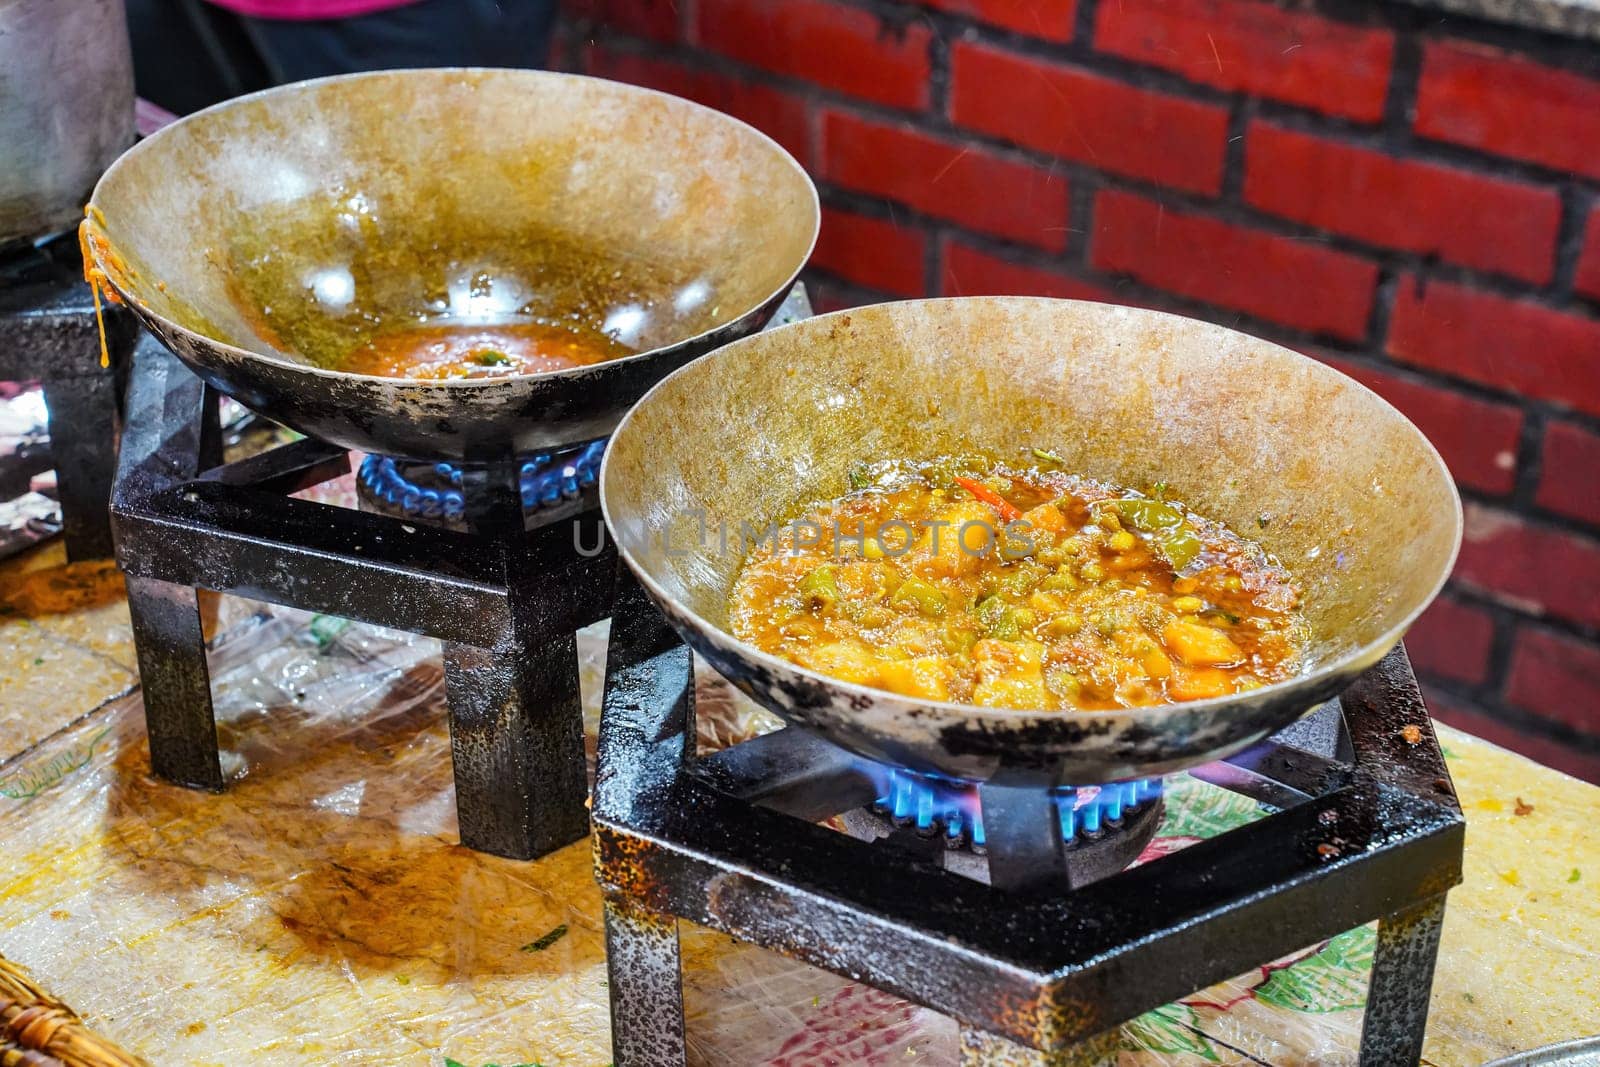 Food being prepared on simple gas stoves in typical Pakistani restaurant, herbs and spices dropped into steel pan with hot dish, closeup detail by Ivanko